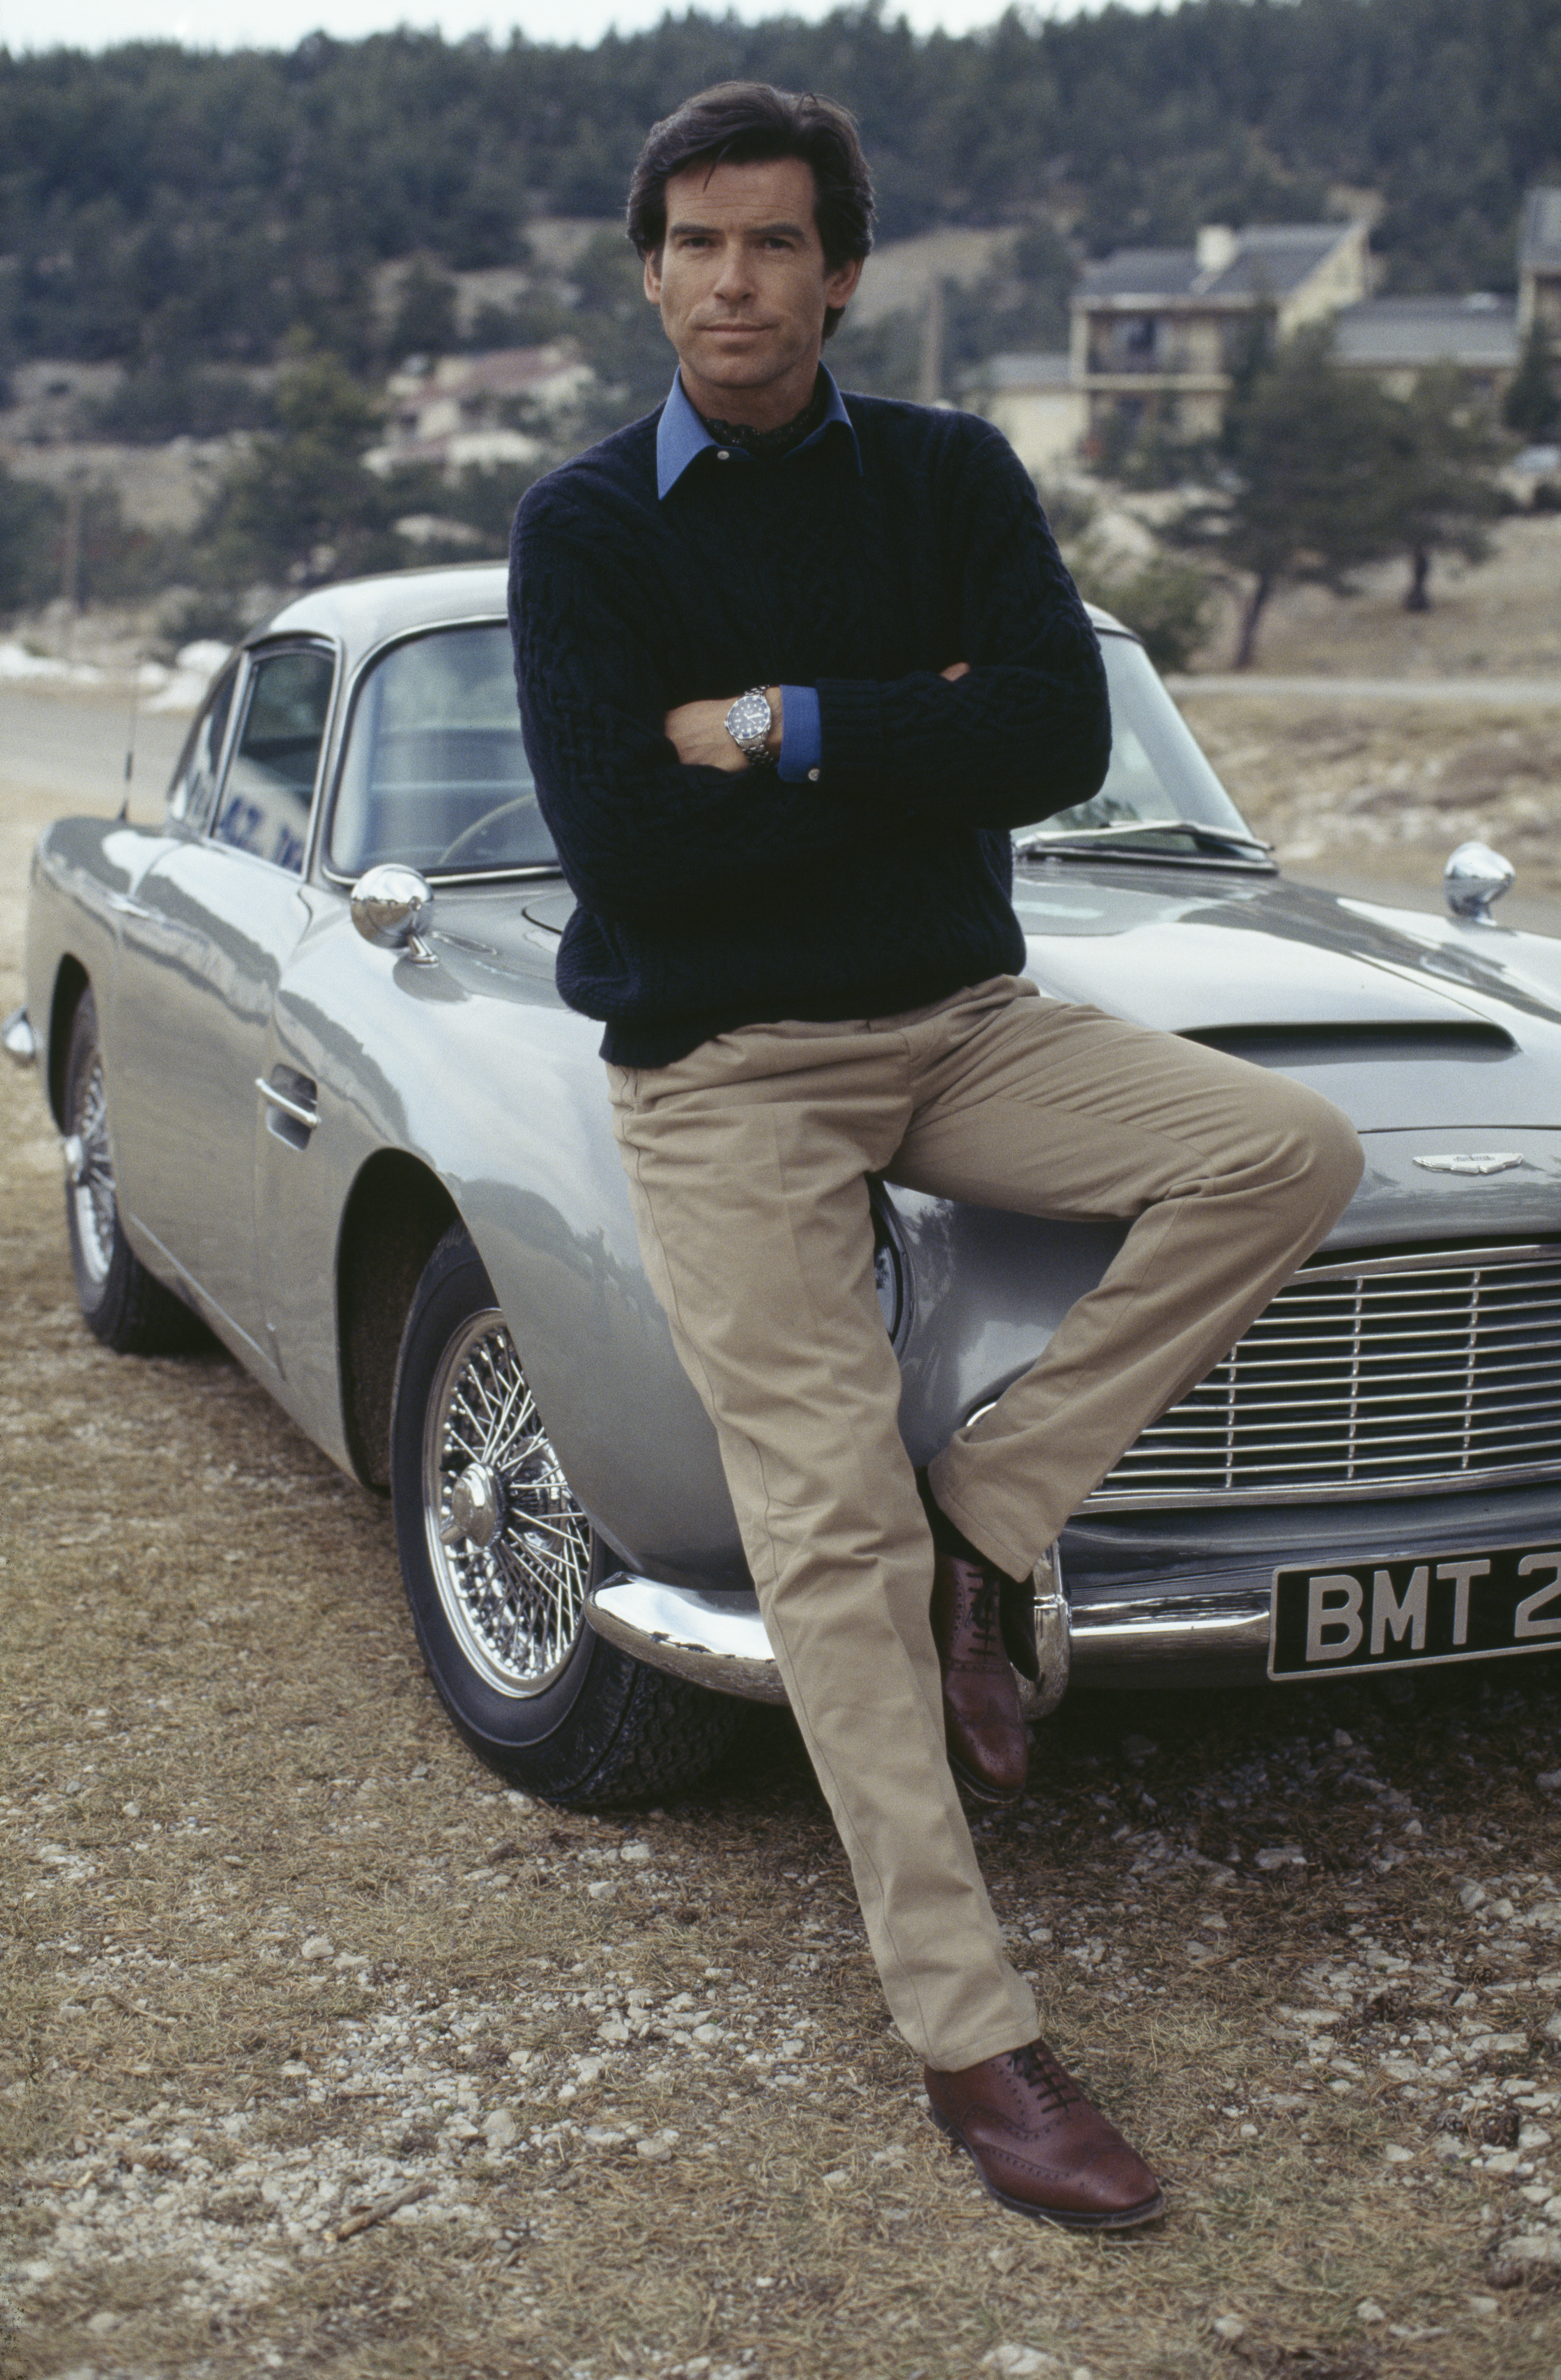 Pierce Brosnan poses with an Aston Martin DB5 in a publicity still for GoldenEye, 1995. (Photo by Keith Hamshere/Getty Images)